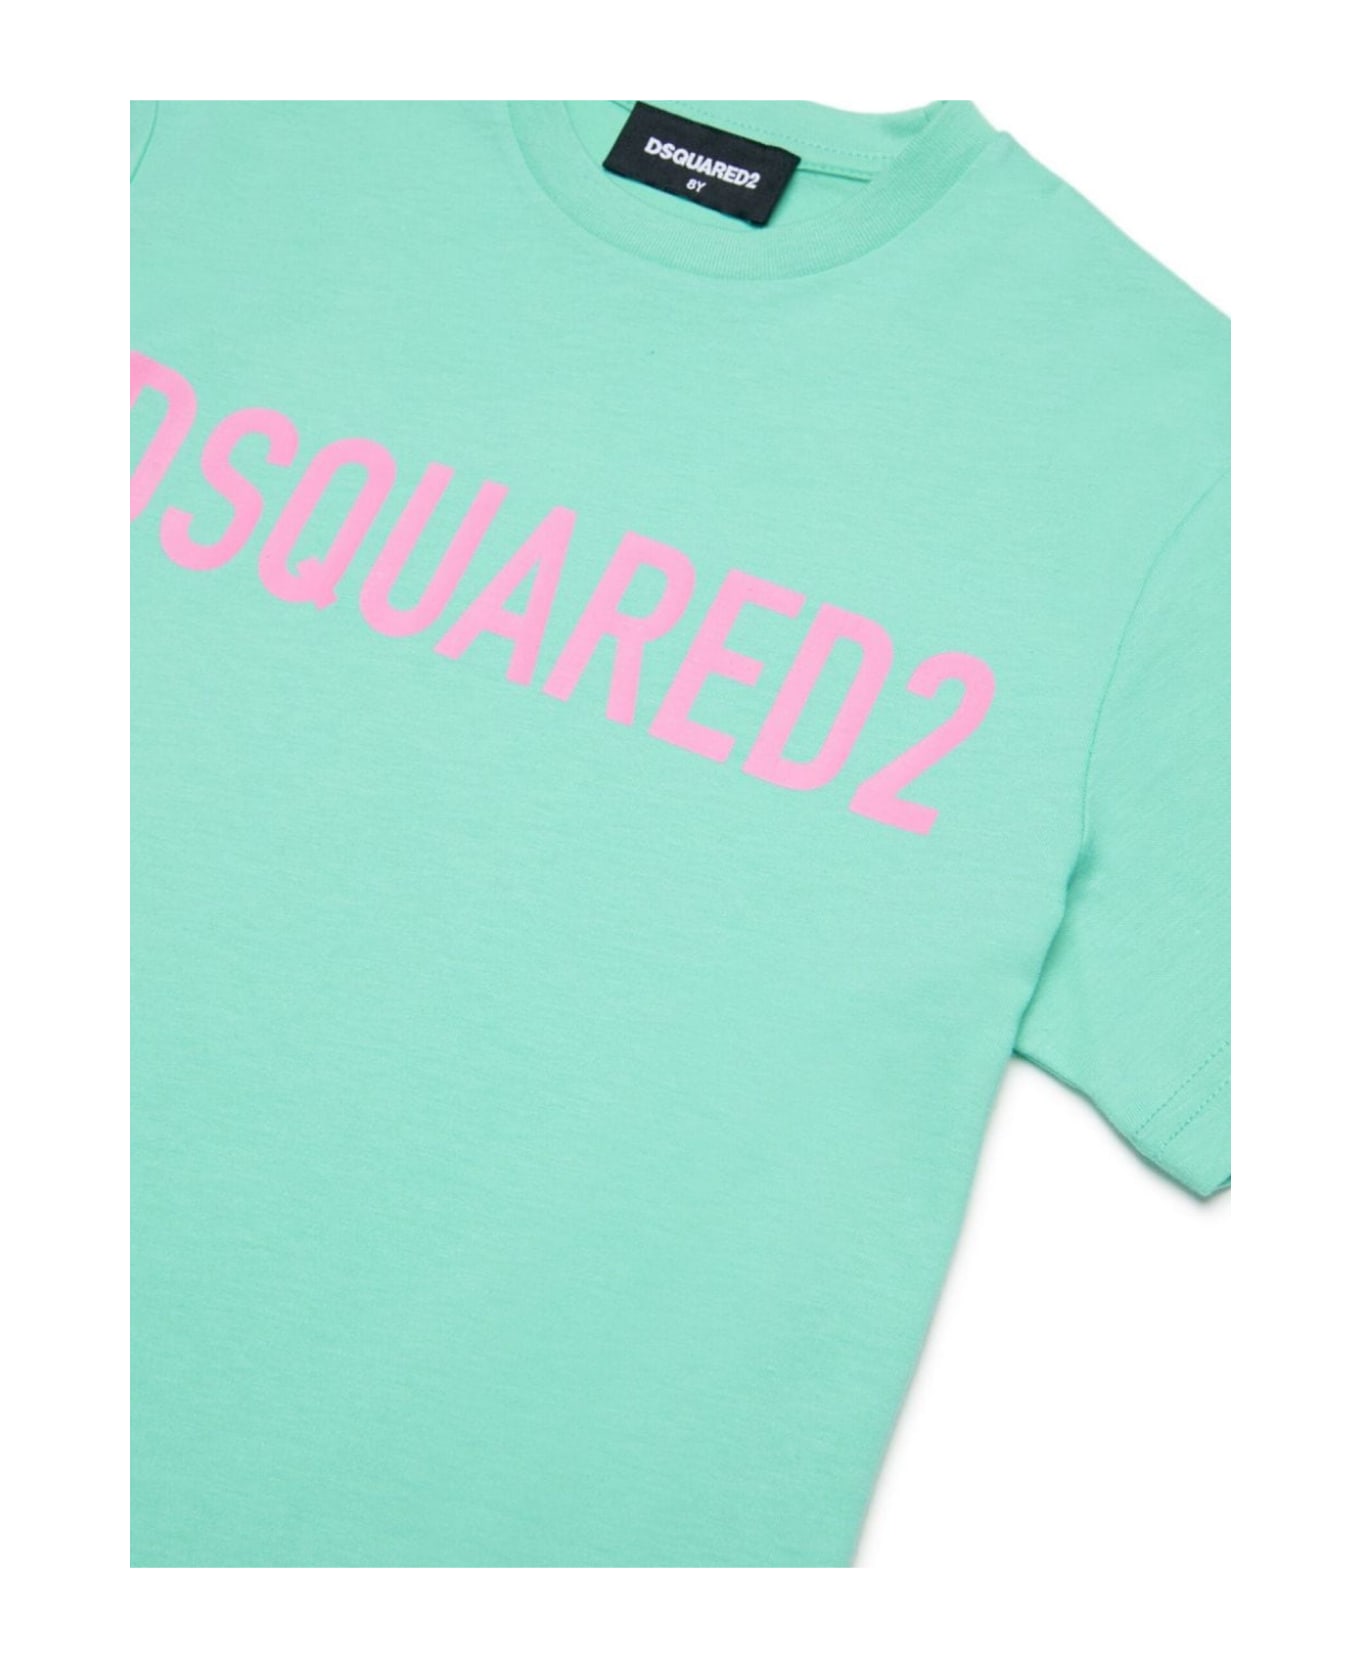 Dsquared2 T-shirts And Polos Green - Green Tシャツ＆ポロシャツ